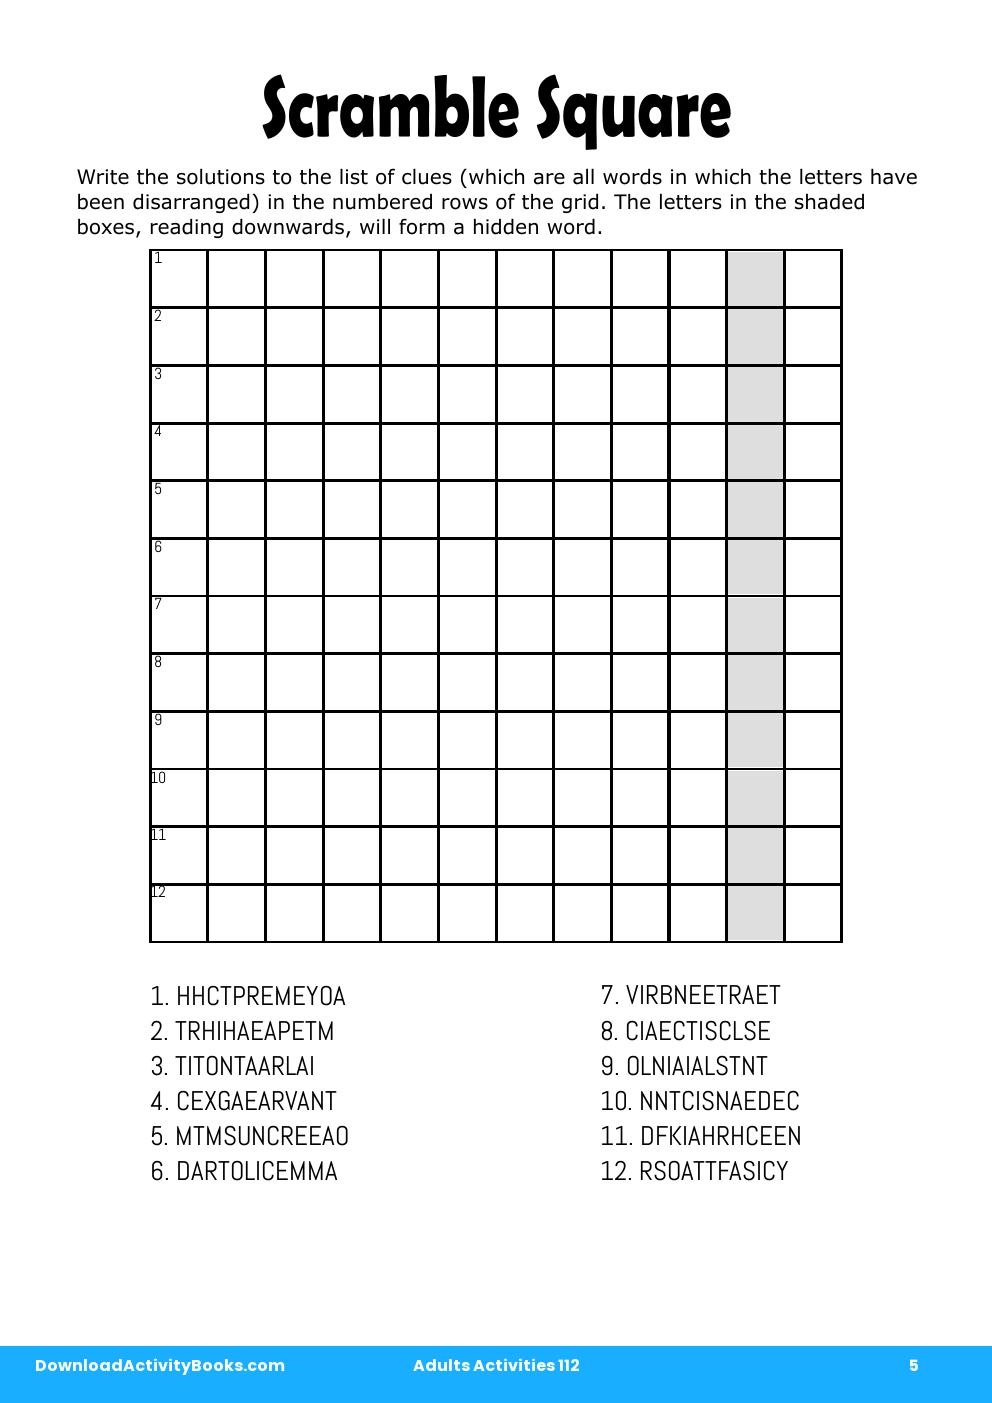 Scramble Square in Adults Activities 112